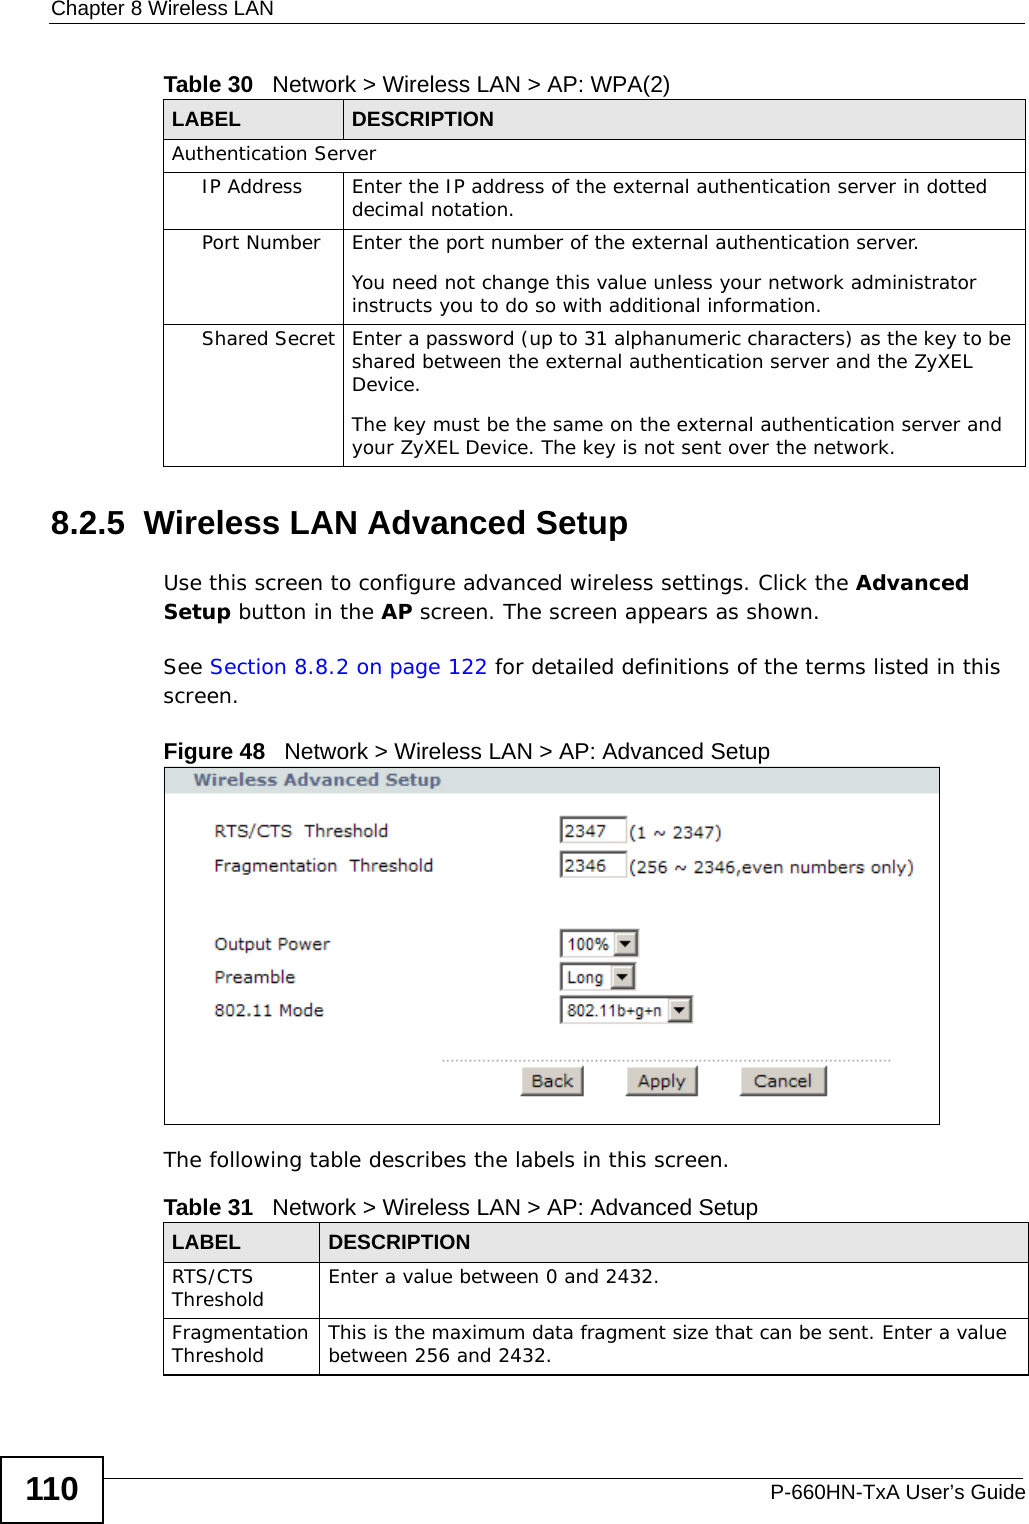 Chapter 8 Wireless LANP-660HN-TxA User’s Guide1108.2.5  Wireless LAN Advanced SetupUse this screen to configure advanced wireless settings. Click the Advanced Setup button in the AP screen. The screen appears as shown.See Section 8.8.2 on page 122 for detailed definitions of the terms listed in this screen.Figure 48   Network &gt; Wireless LAN &gt; AP: Advanced SetupThe following table describes the labels in this screen. Authentication ServerIP Address Enter the IP address of the external authentication server in dotted decimal notation.Port Number Enter the port number of the external authentication server.You need not change this value unless your network administrator instructs you to do so with additional information. Shared Secret Enter a password (up to 31 alphanumeric characters) as the key to be shared between the external authentication server and the ZyXEL Device.The key must be the same on the external authentication server and your ZyXEL Device. The key is not sent over the network. Table 30   Network &gt; Wireless LAN &gt; AP: WPA(2)LABEL DESCRIPTIONTable 31   Network &gt; Wireless LAN &gt; AP: Advanced SetupLABEL DESCRIPTIONRTS/CTS Threshold Enter a value between 0 and 2432. Fragmentation Threshold This is the maximum data fragment size that can be sent. Enter a value between 256 and 2432. 